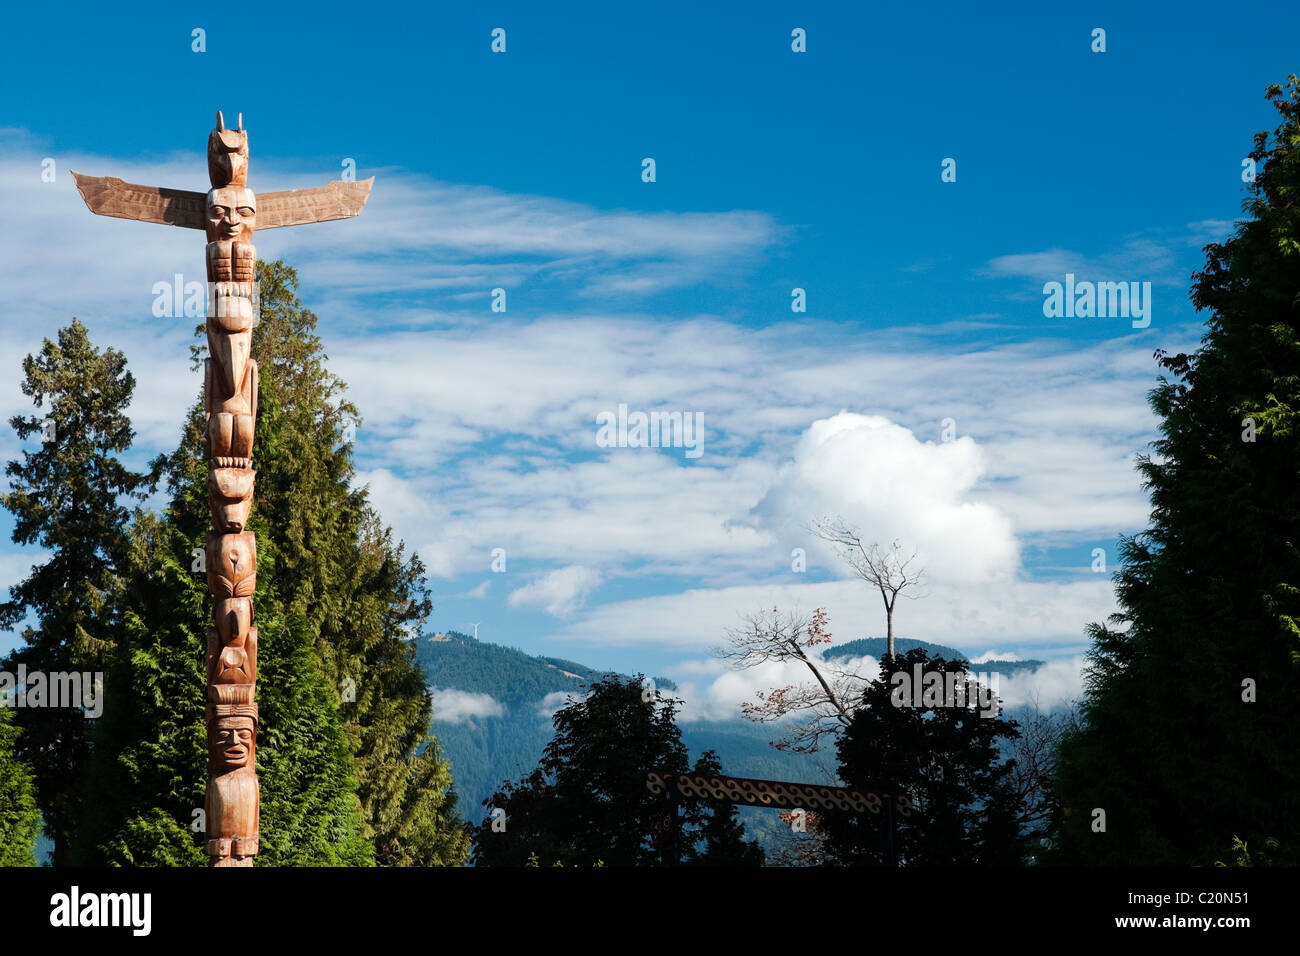 First Nations carving at the Totem Park in Stanley Park Vancouver, BC Canada. Stock Photo